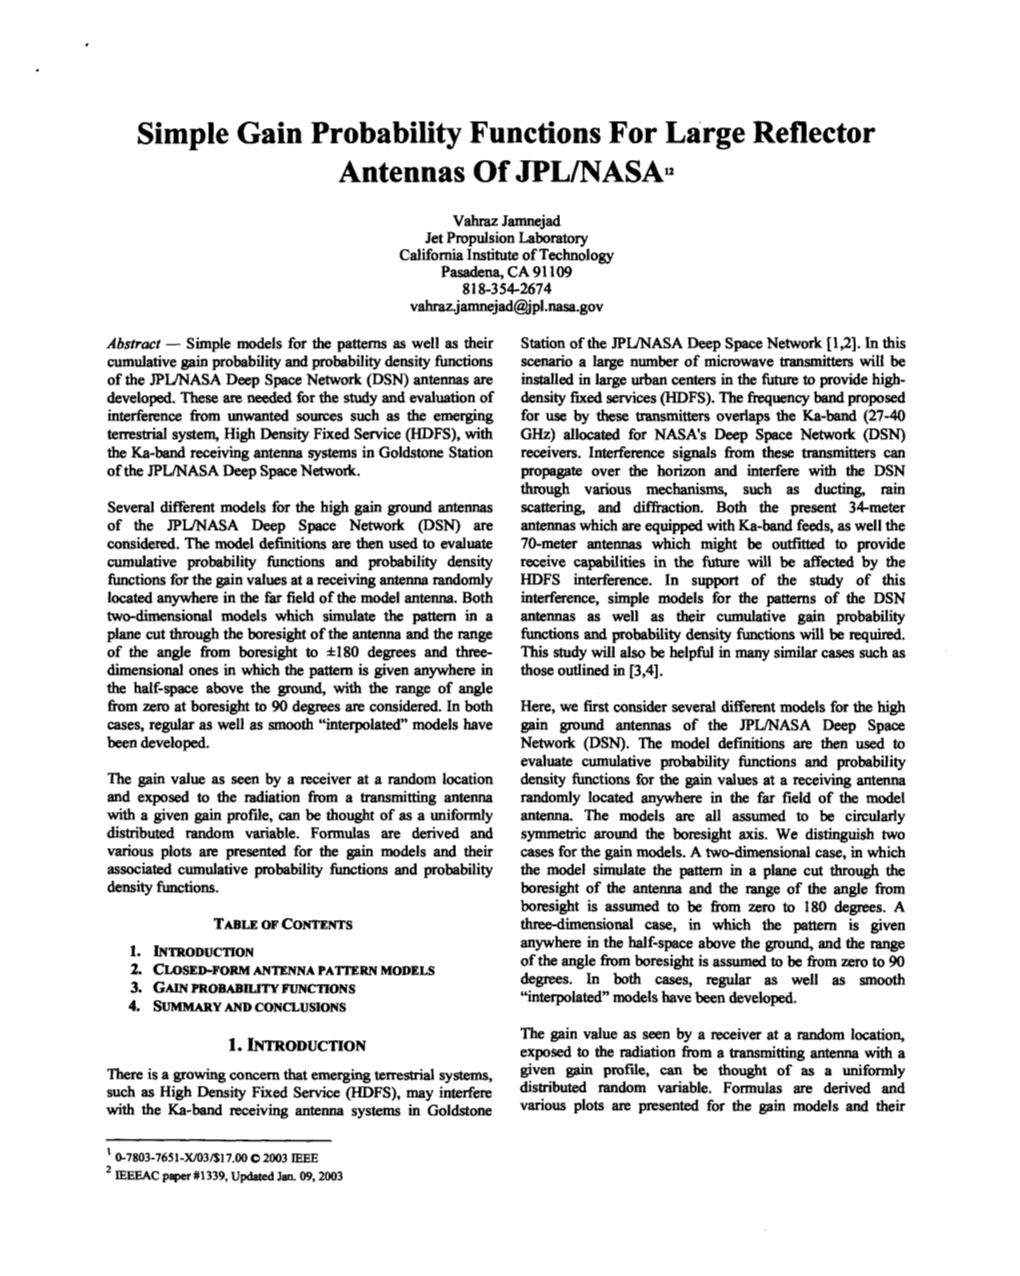 Simple Gain Probability Functions for Large Reflector Antennas of JPL/Nasau